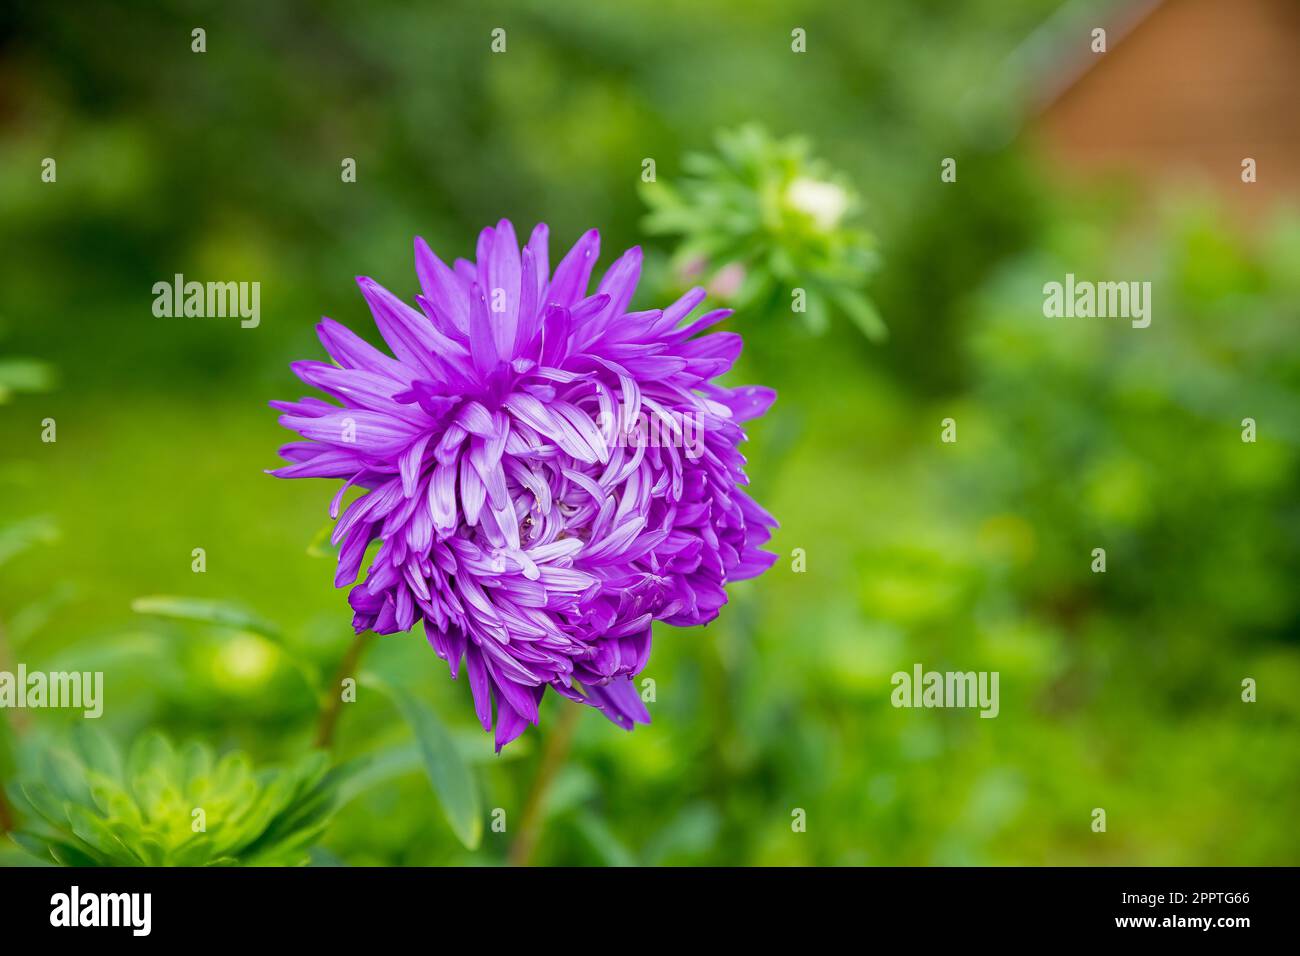 A purple aster bloomed in the garden. Purple flowers in autumn. In the garden there is a purple chrysanthemum.violet flower heads of China aster Stock Photo